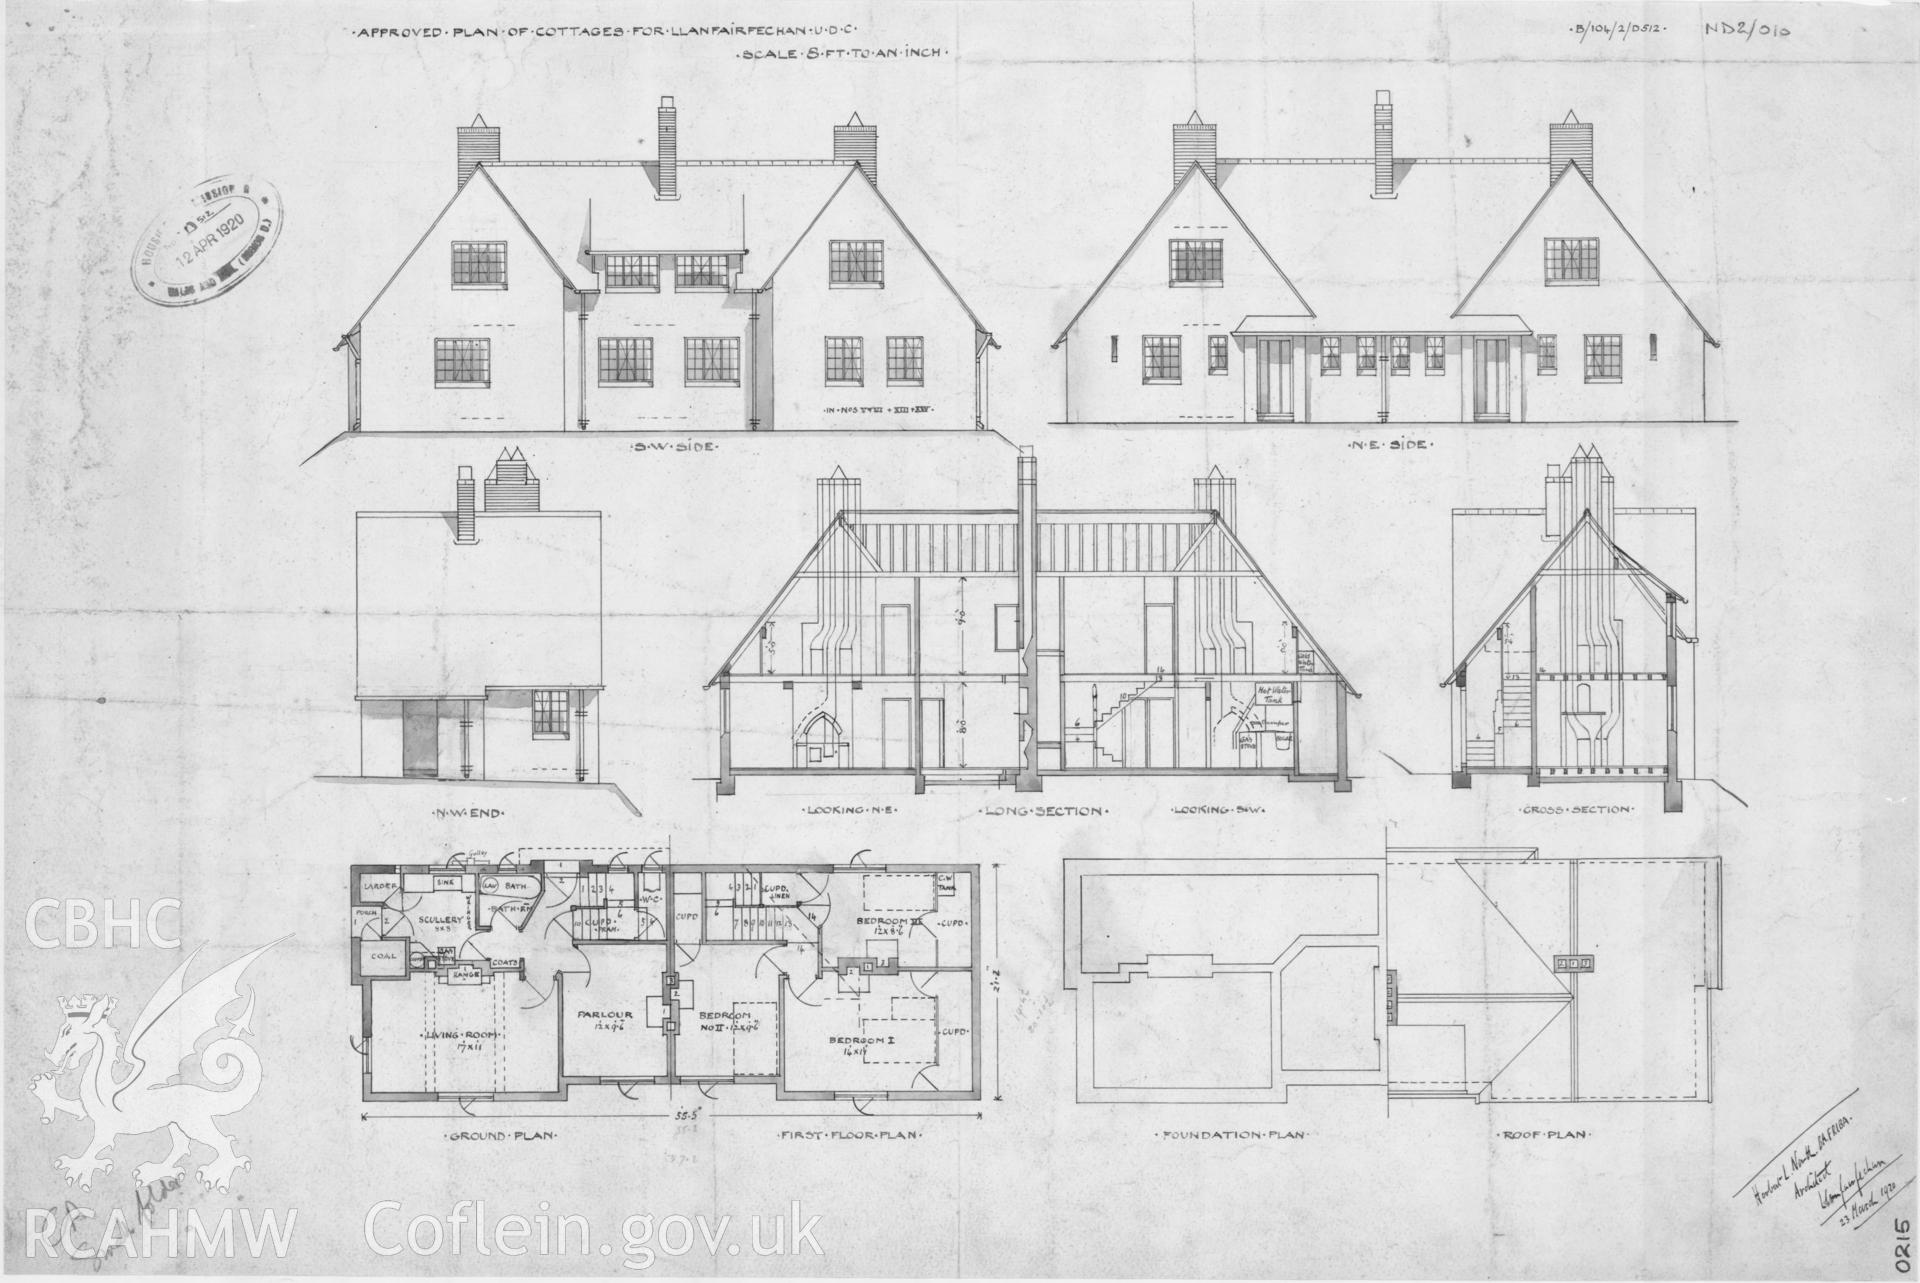 Plans, sections and elevations of an approved design of cottages for Llanfairfechan U.D.C., ink on paper, scale eight feet to one inch.